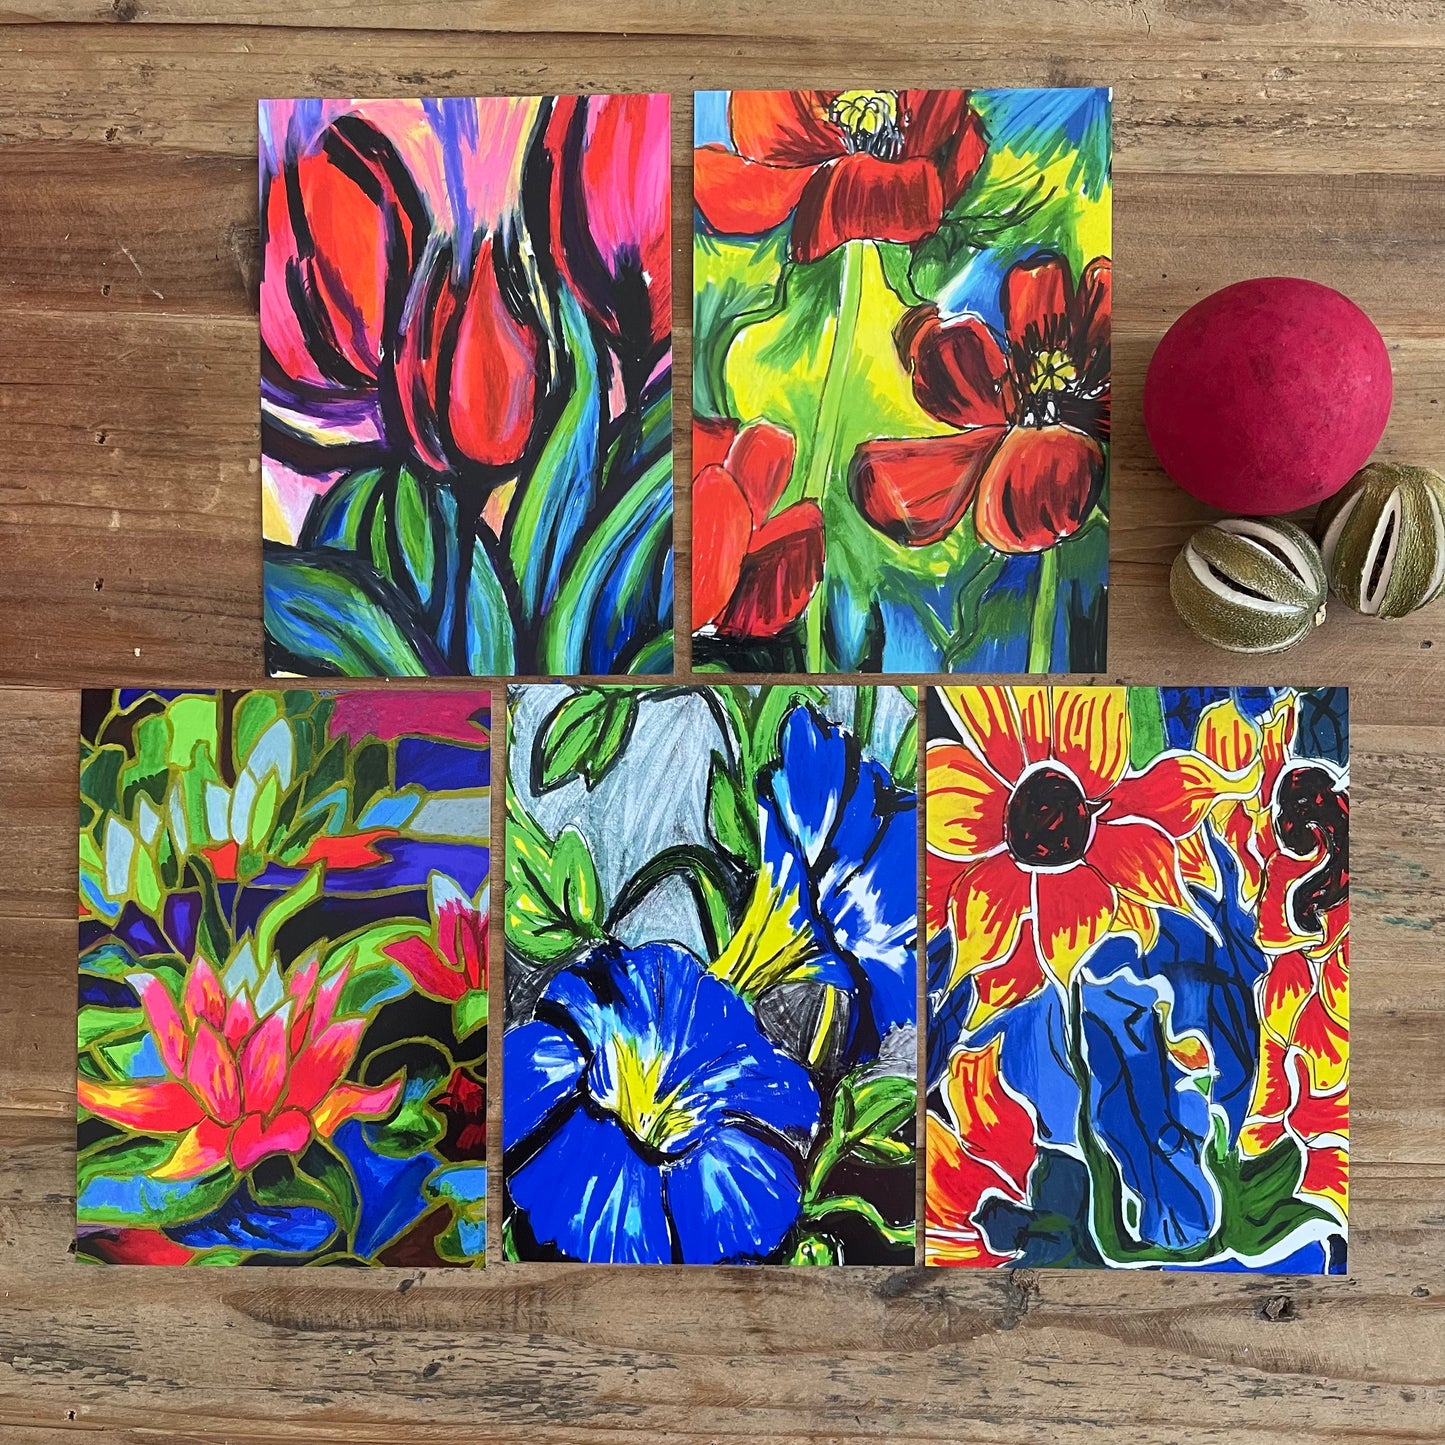 Flowers - Set of 5 prints 5x7" for $25